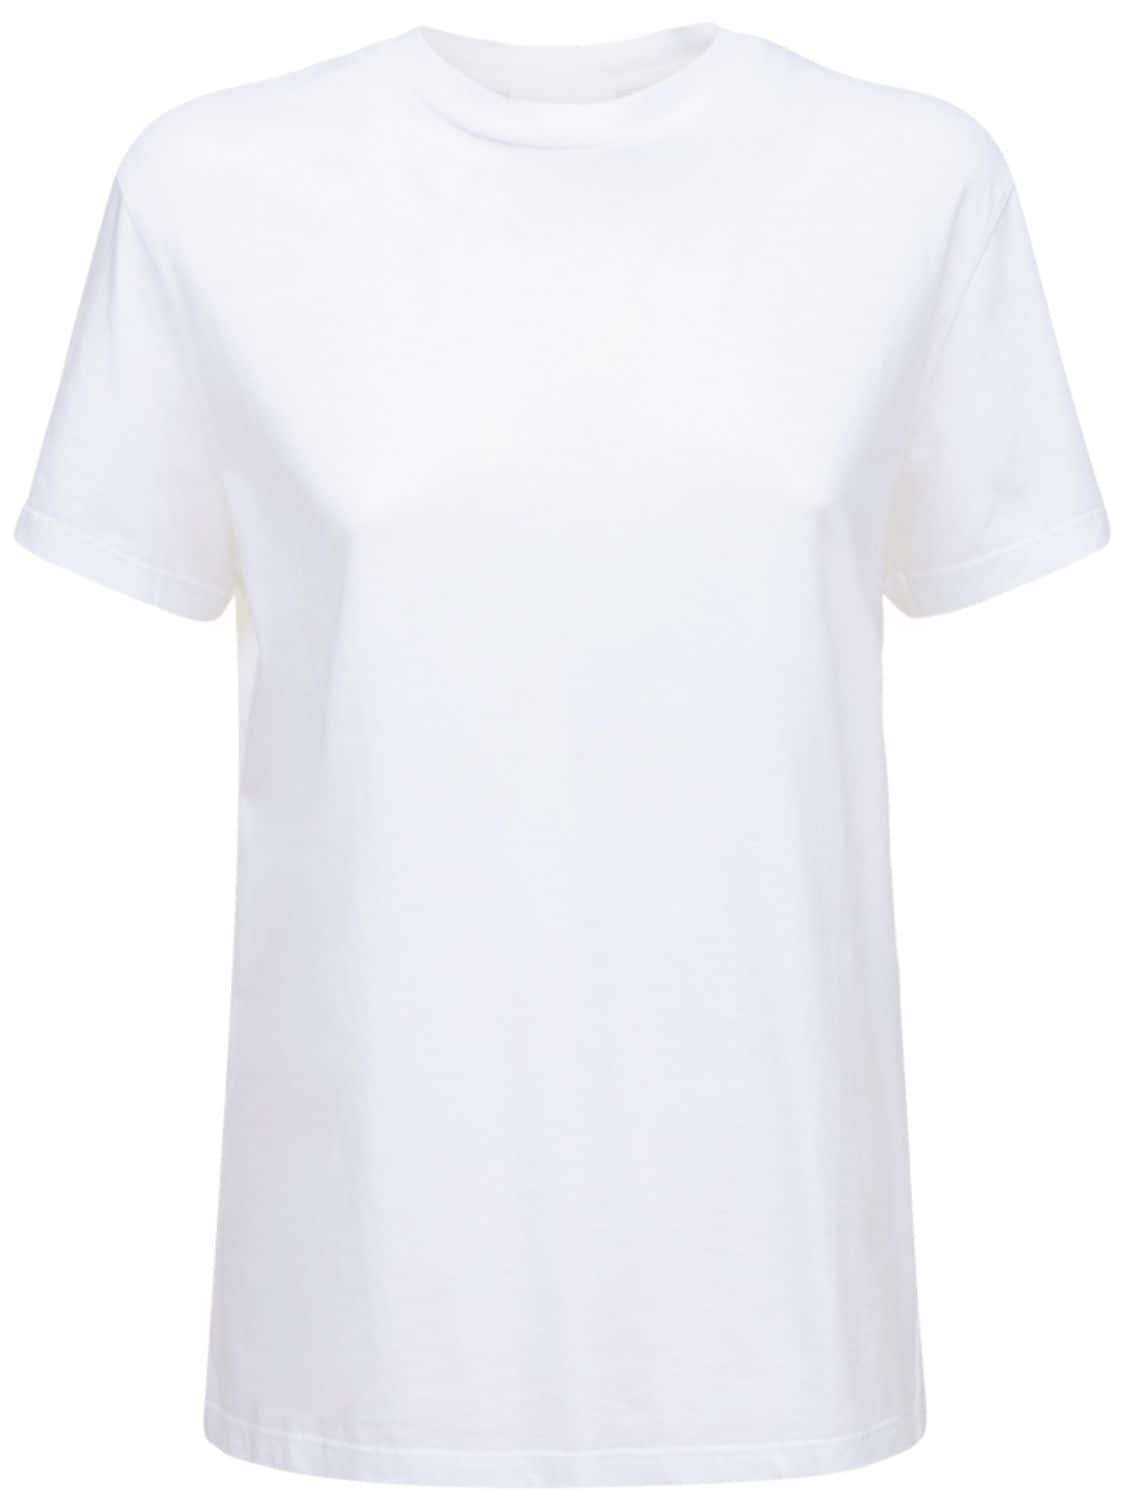 Image of Classic Cotton Jersey T-shirt